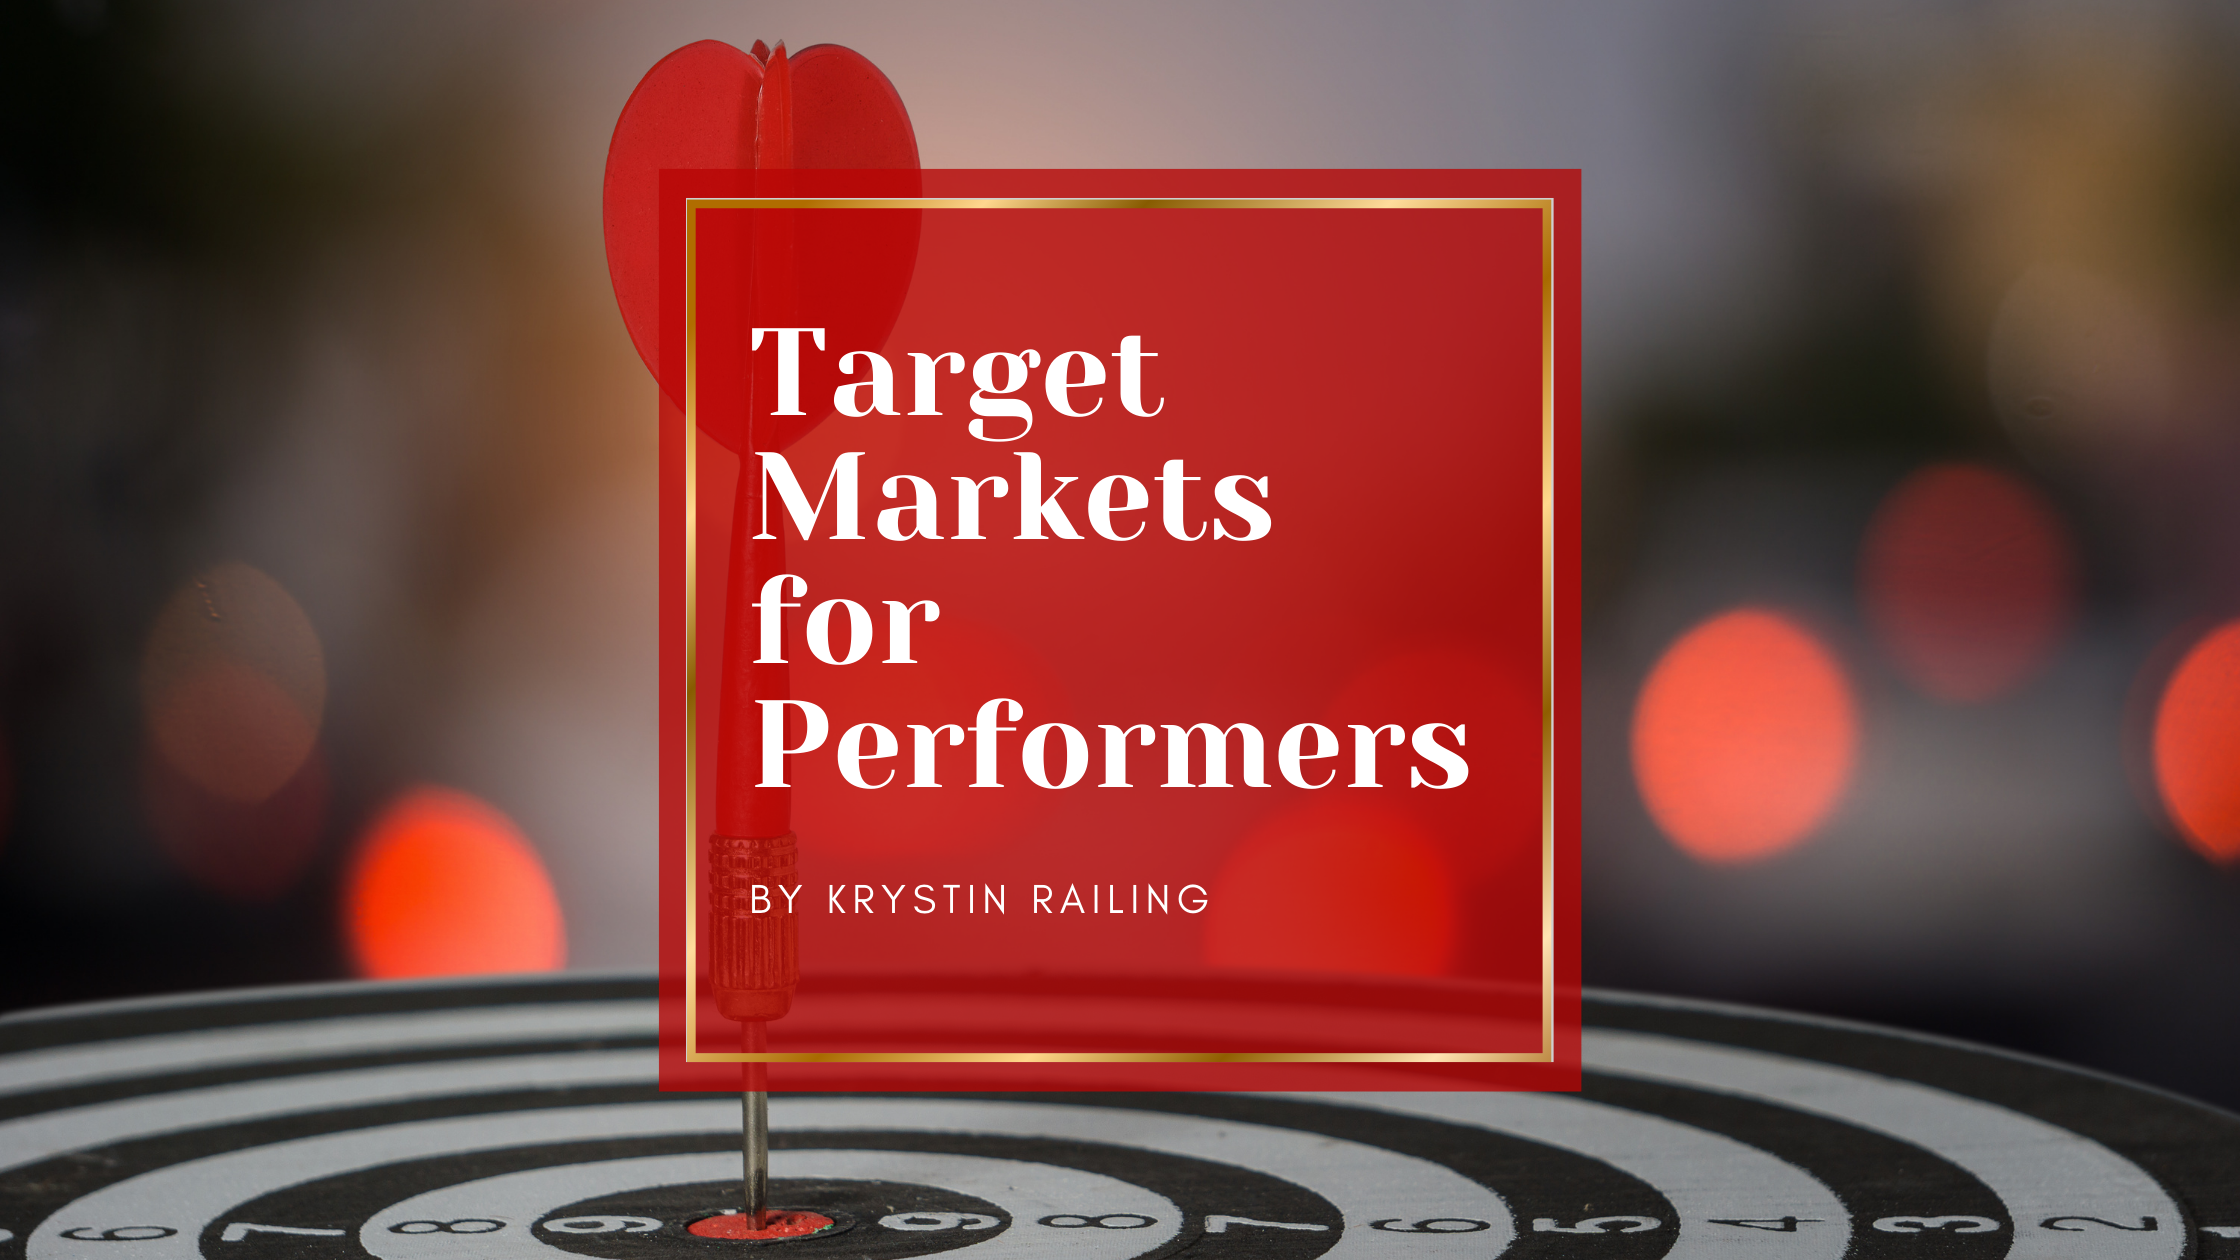 List of Target Markets for Performers